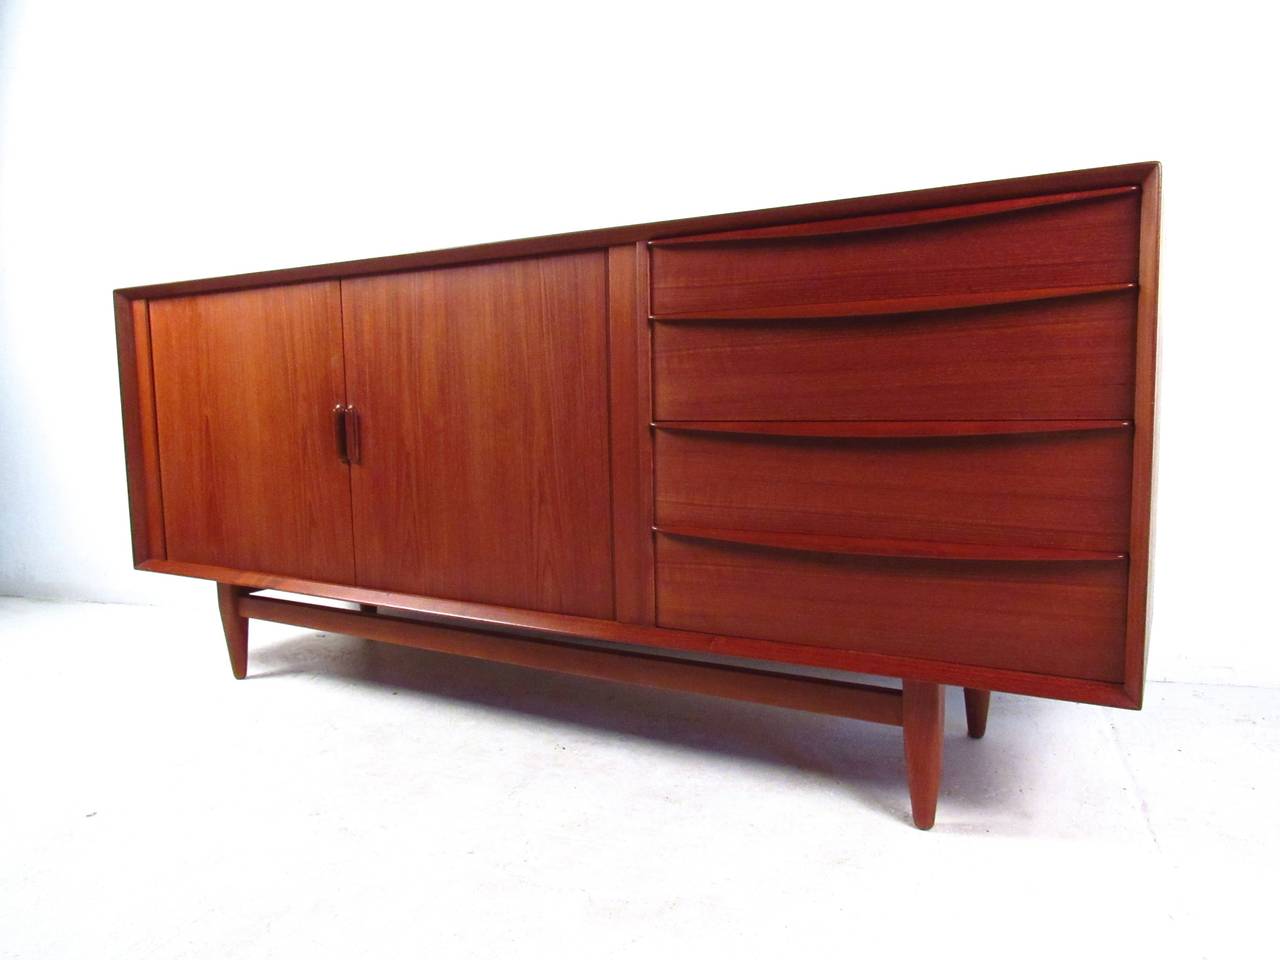 This beautiful midcentury Danish teak sideboard come features plenty of space for storage or display, the beautiful teak veneer, tapered legs, finished back, and unique drawer pulls add to the charm of this Falster tambour sideboard. Please confirm